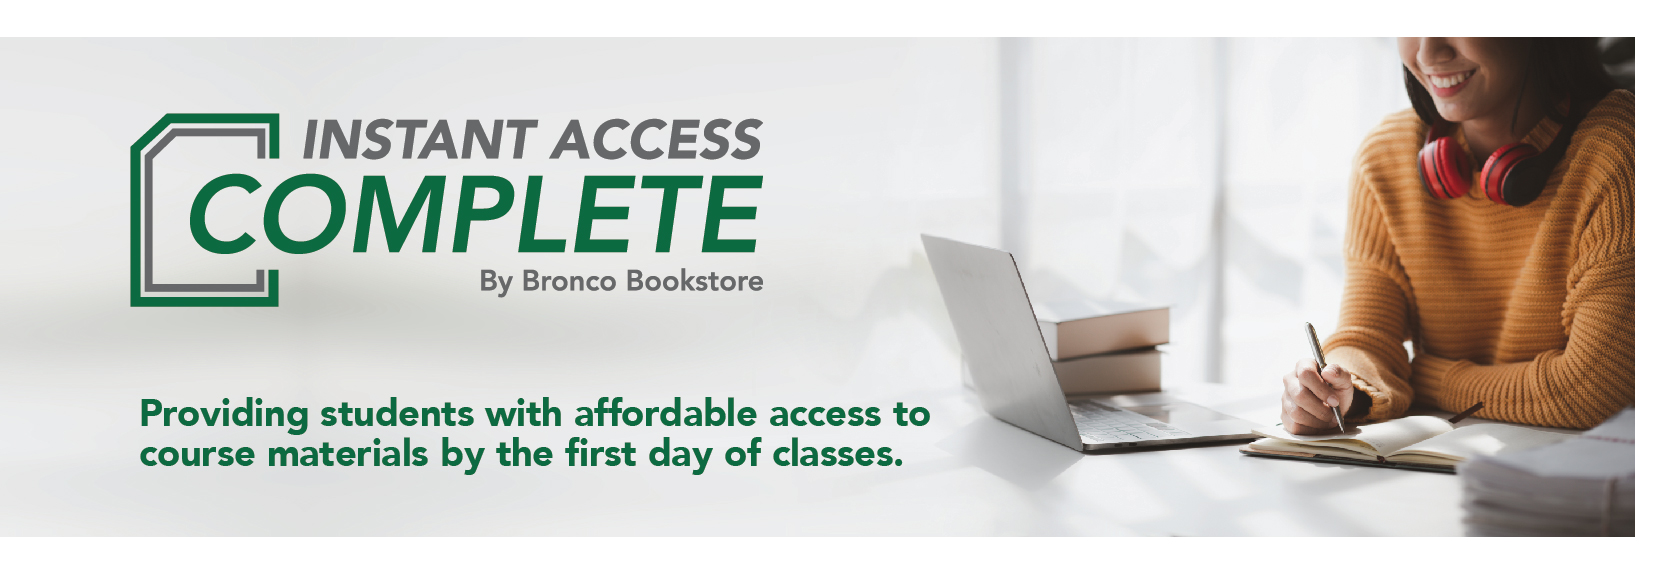 Instant Access Complete by Bronco Bookstore, providing students with affordable access to